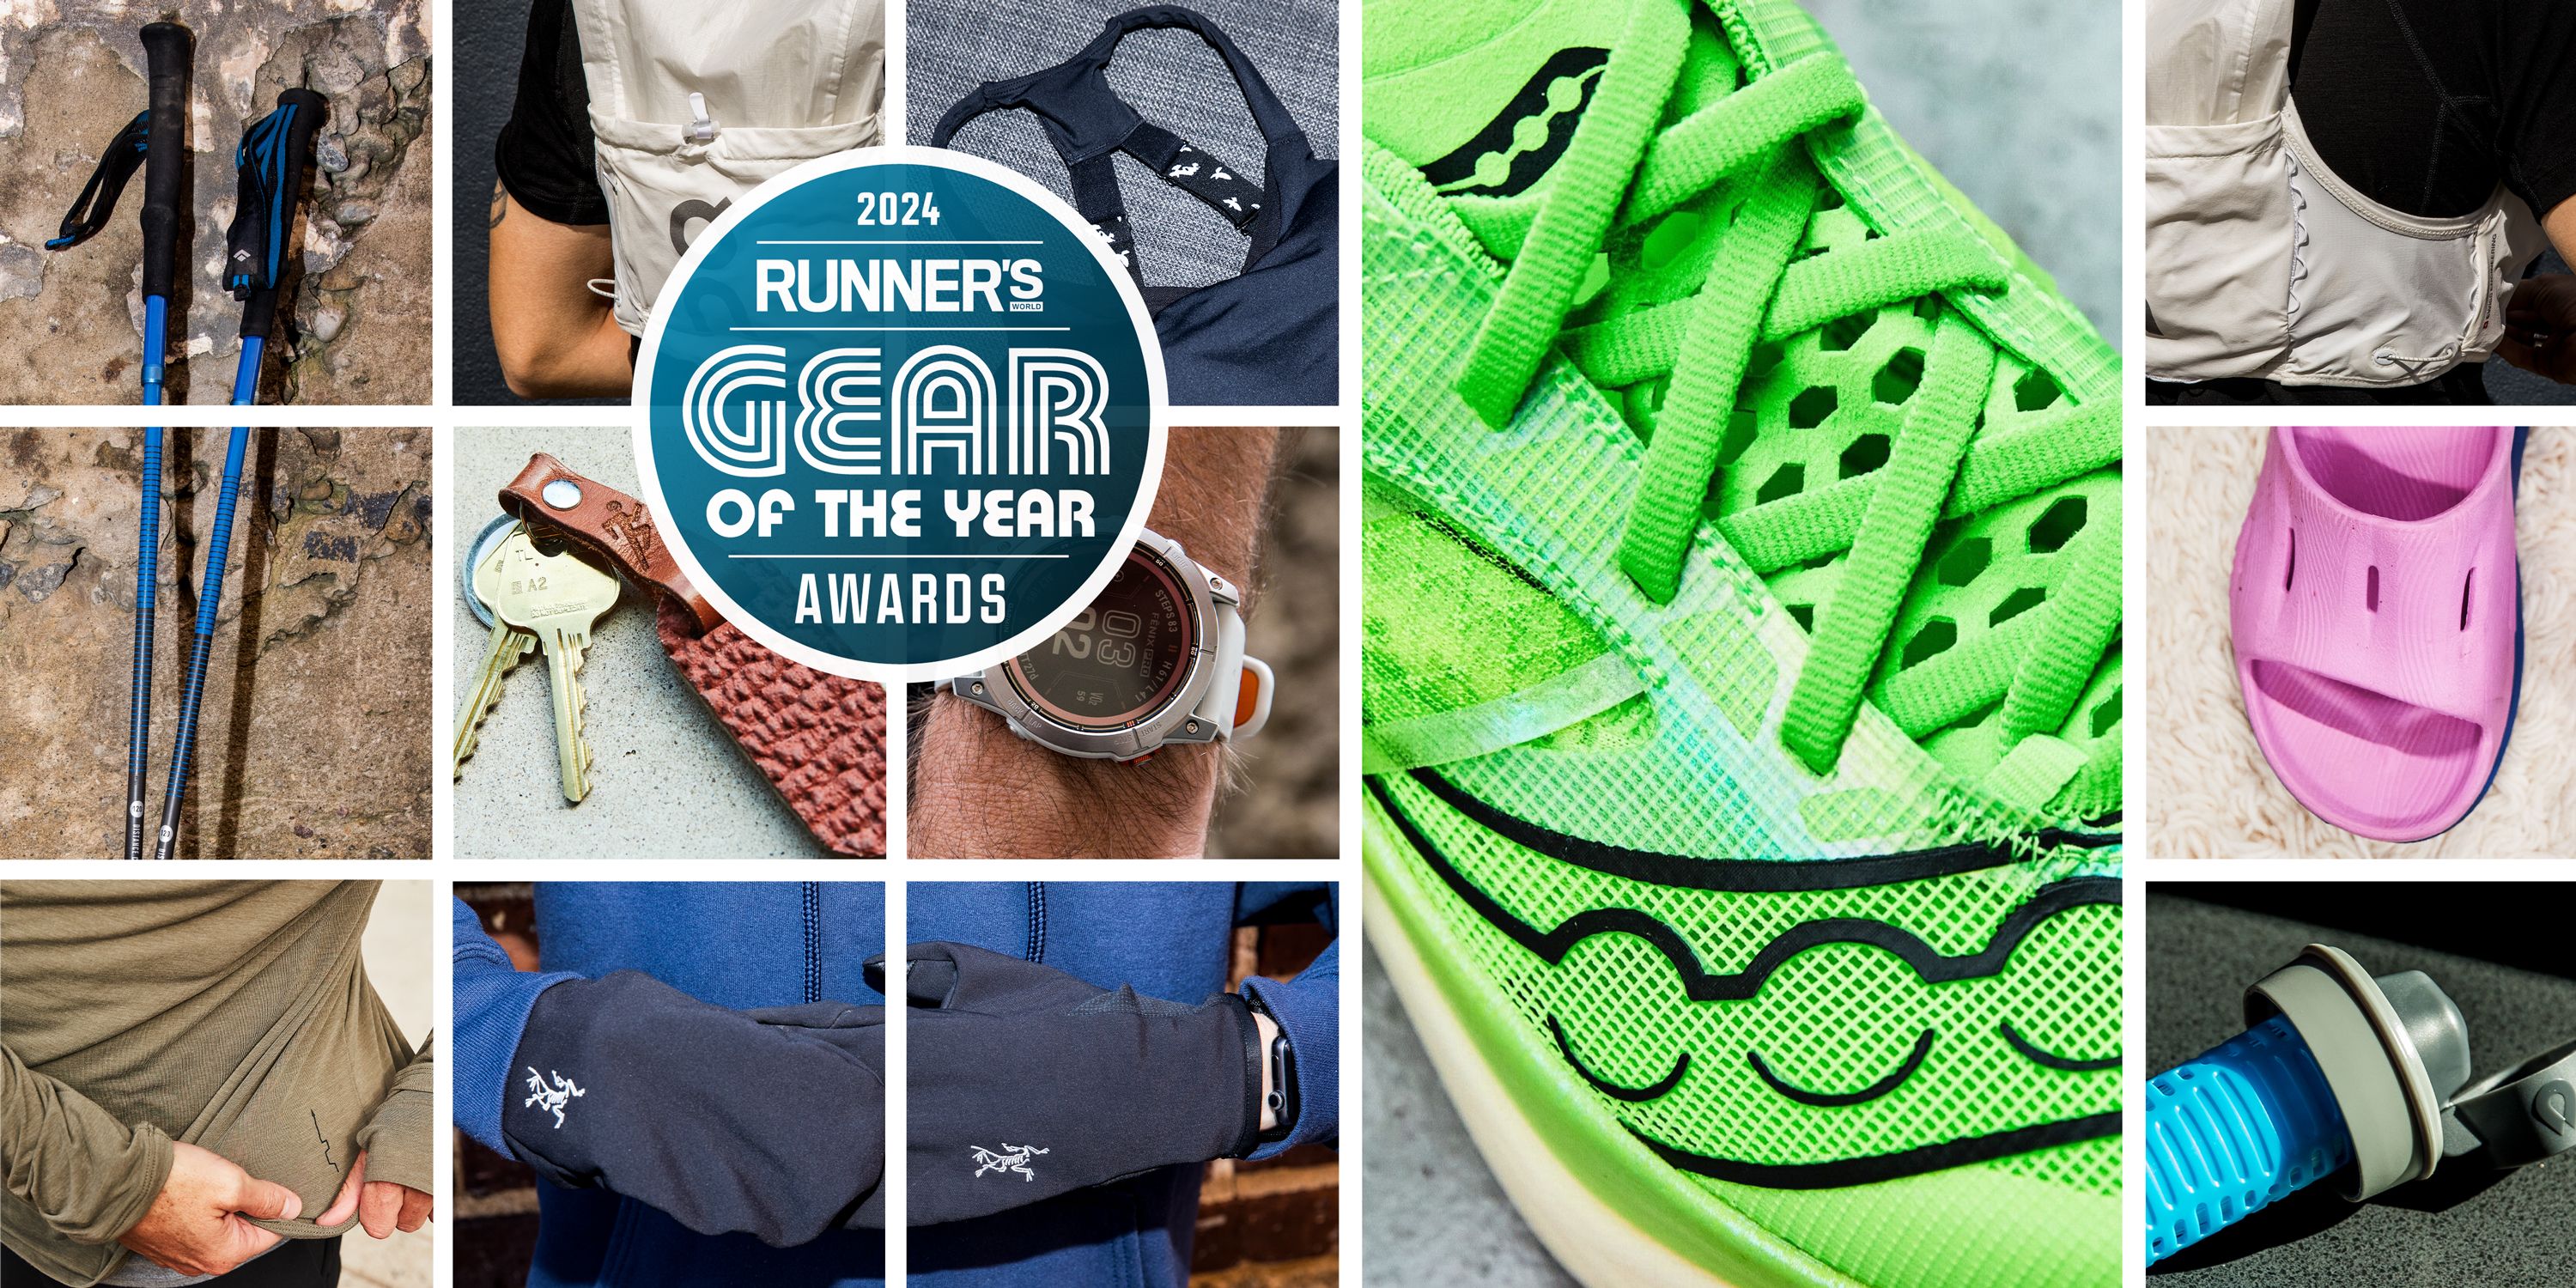 Don't Worry, We Know What Dad Wants - The RunnerBox